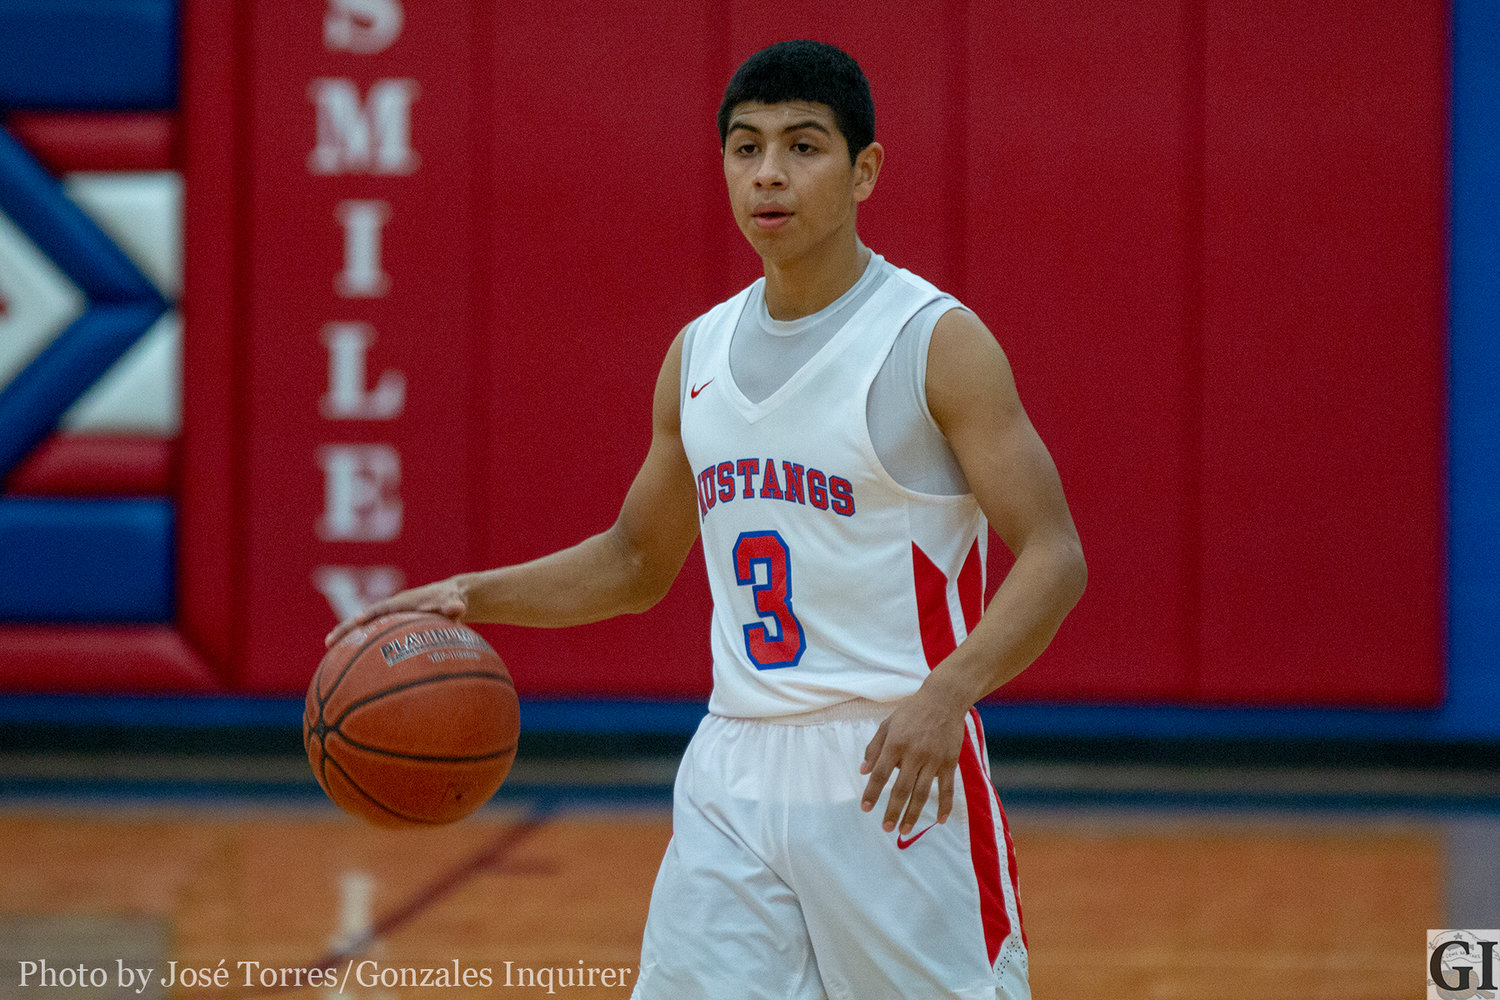 Jose Rodriguez (3) was named to the District 27-3A first team all district.